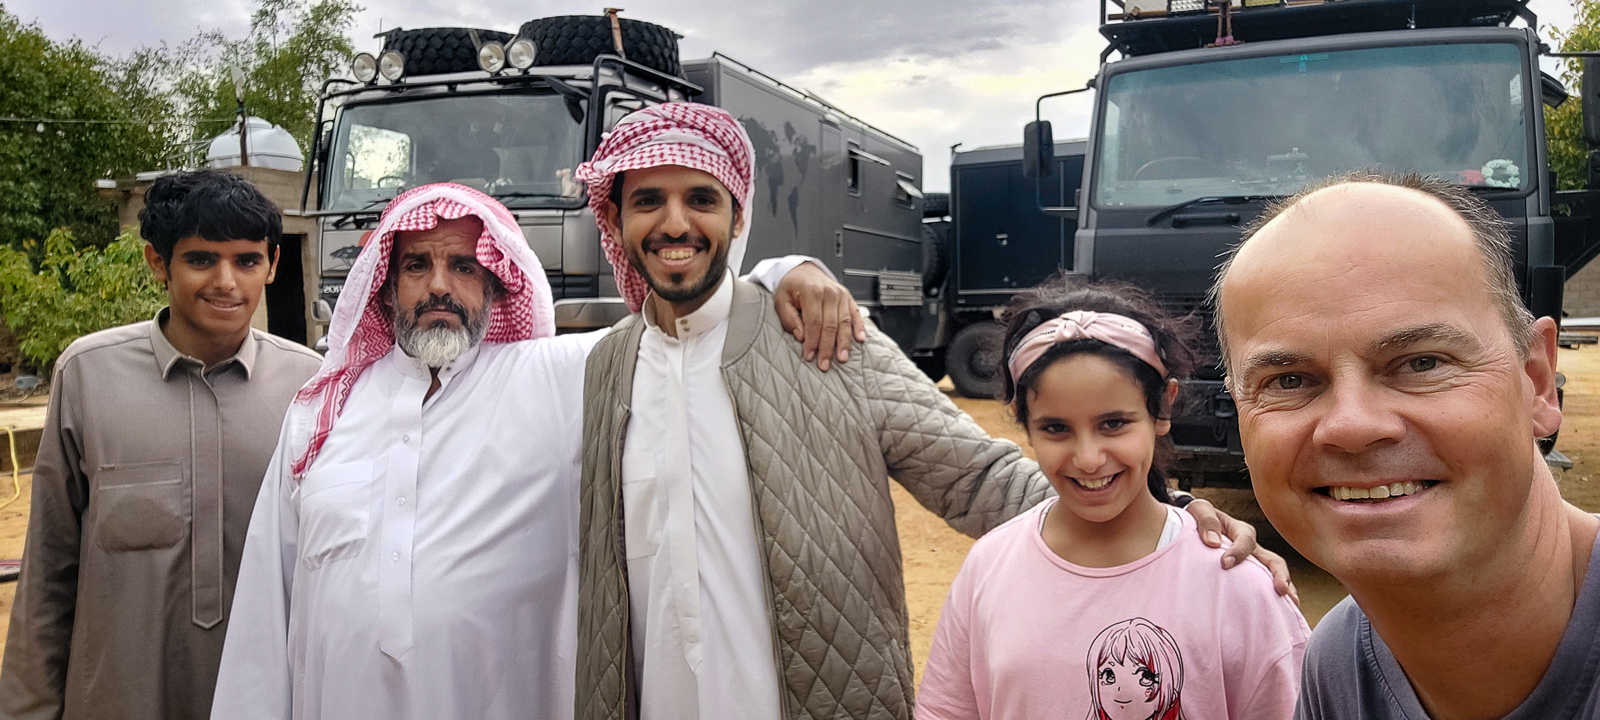 <span  class="uc_style_uc_tiles_grid_image_elementor_uc_items_attribute_title" style="color:#ffffff;">connecting is easy in Saudi: they just stop you on the road and invite you to their homes or farms: so nice and friendly!</span>